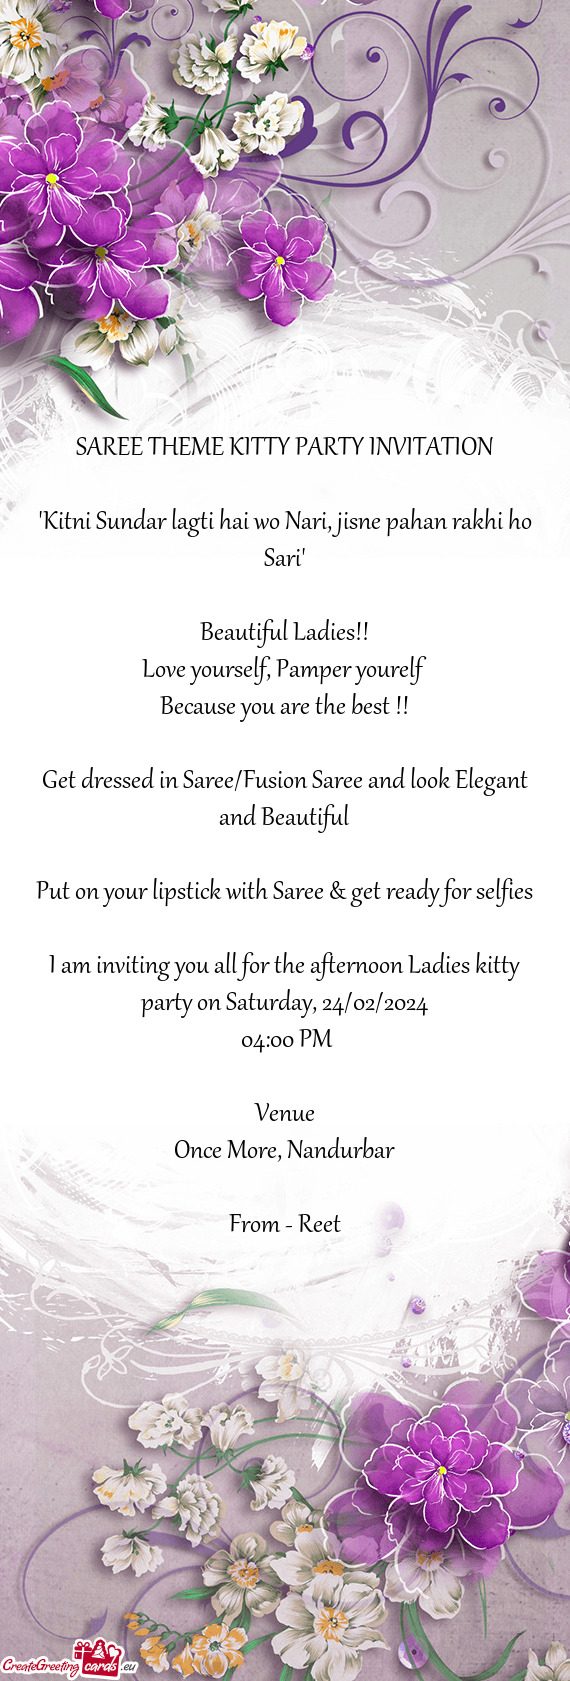 I am inviting you all for the afternoon Ladies kitty party on Saturday, 24/02/2024